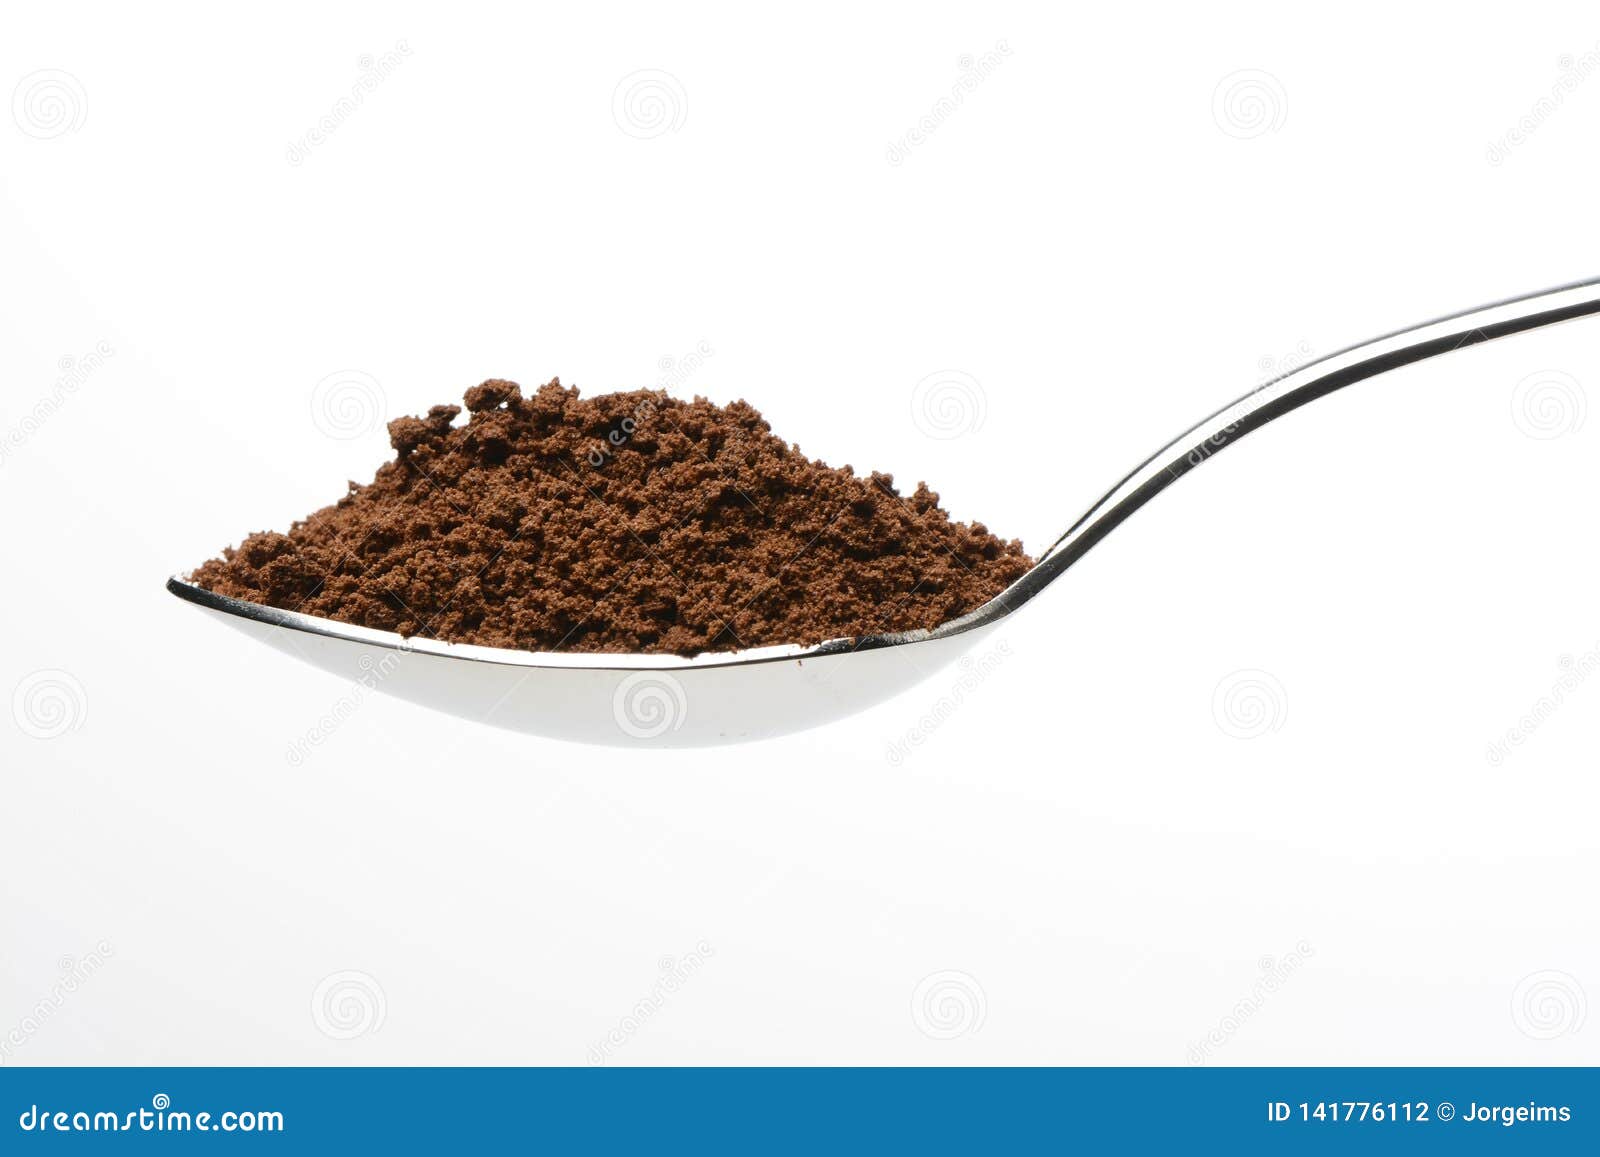 soluble coffee in a spoon